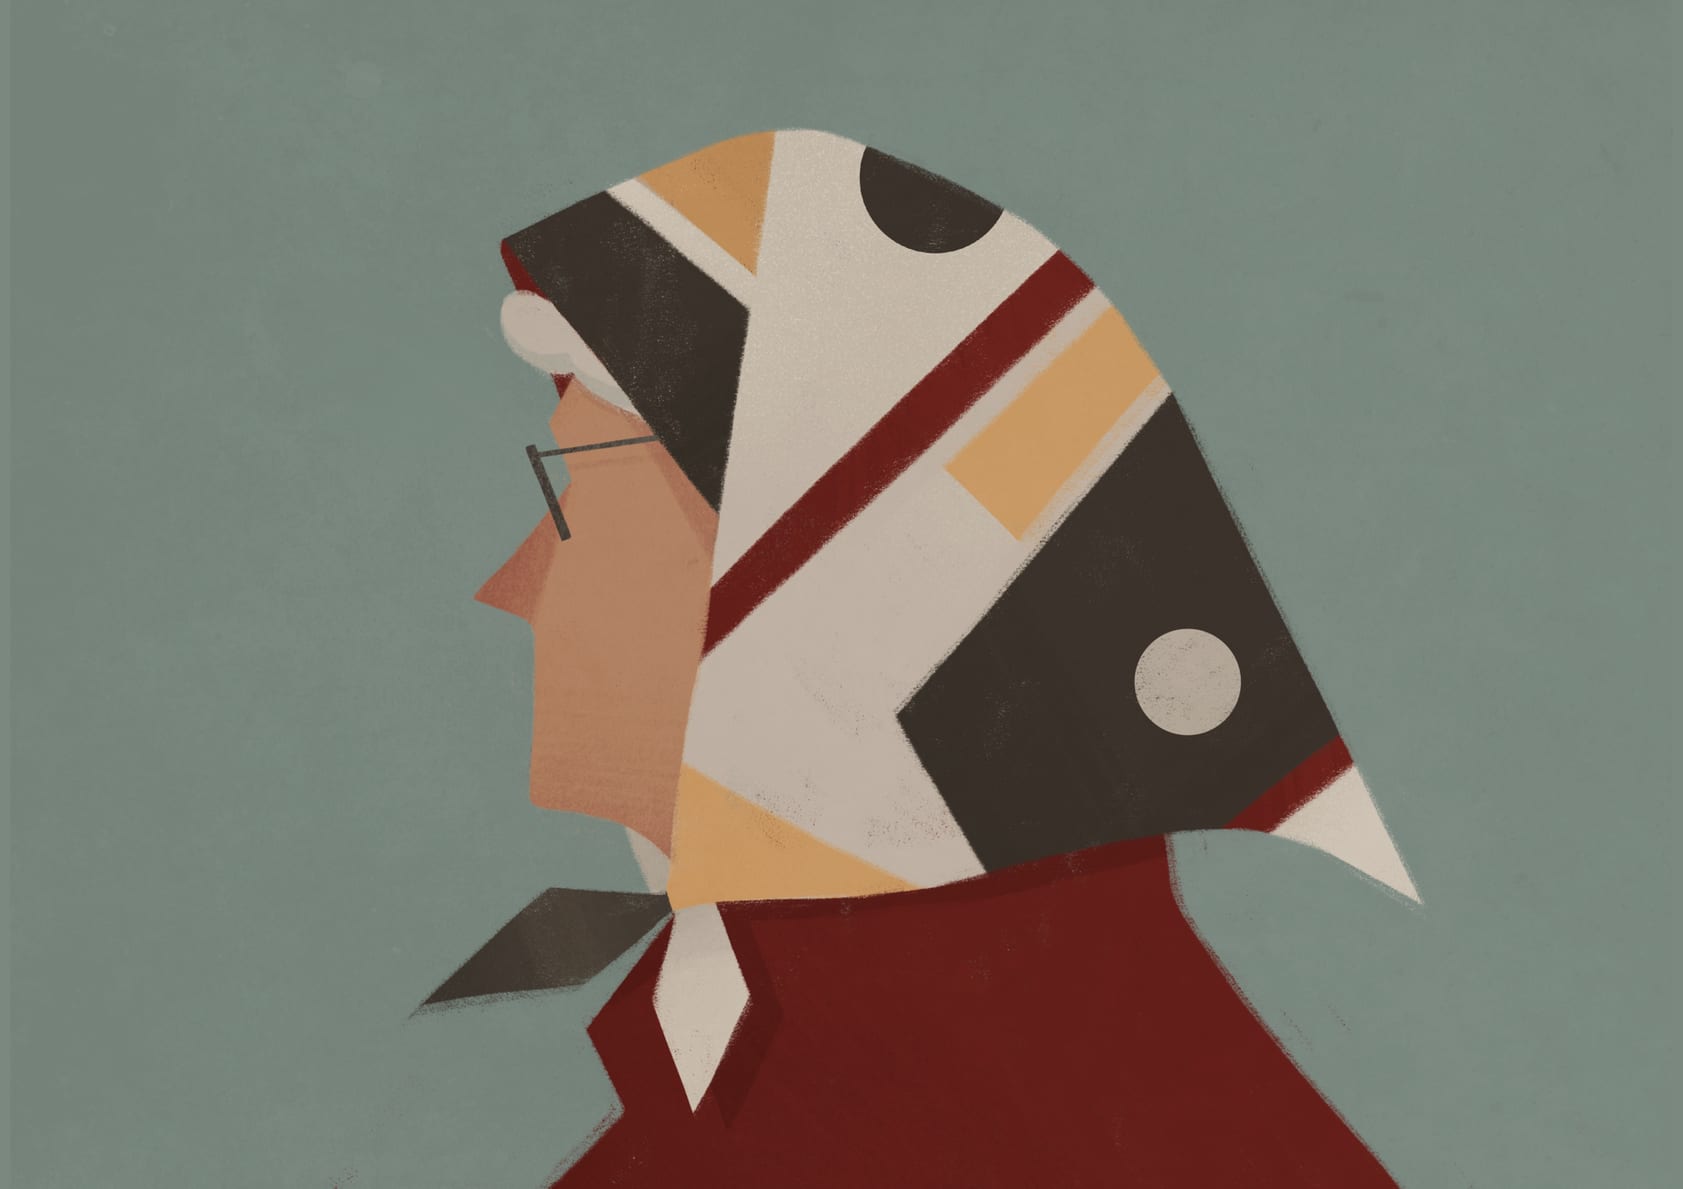 Profile Portrait Of A Grandmother In A Headscarf. Aging Up Concept